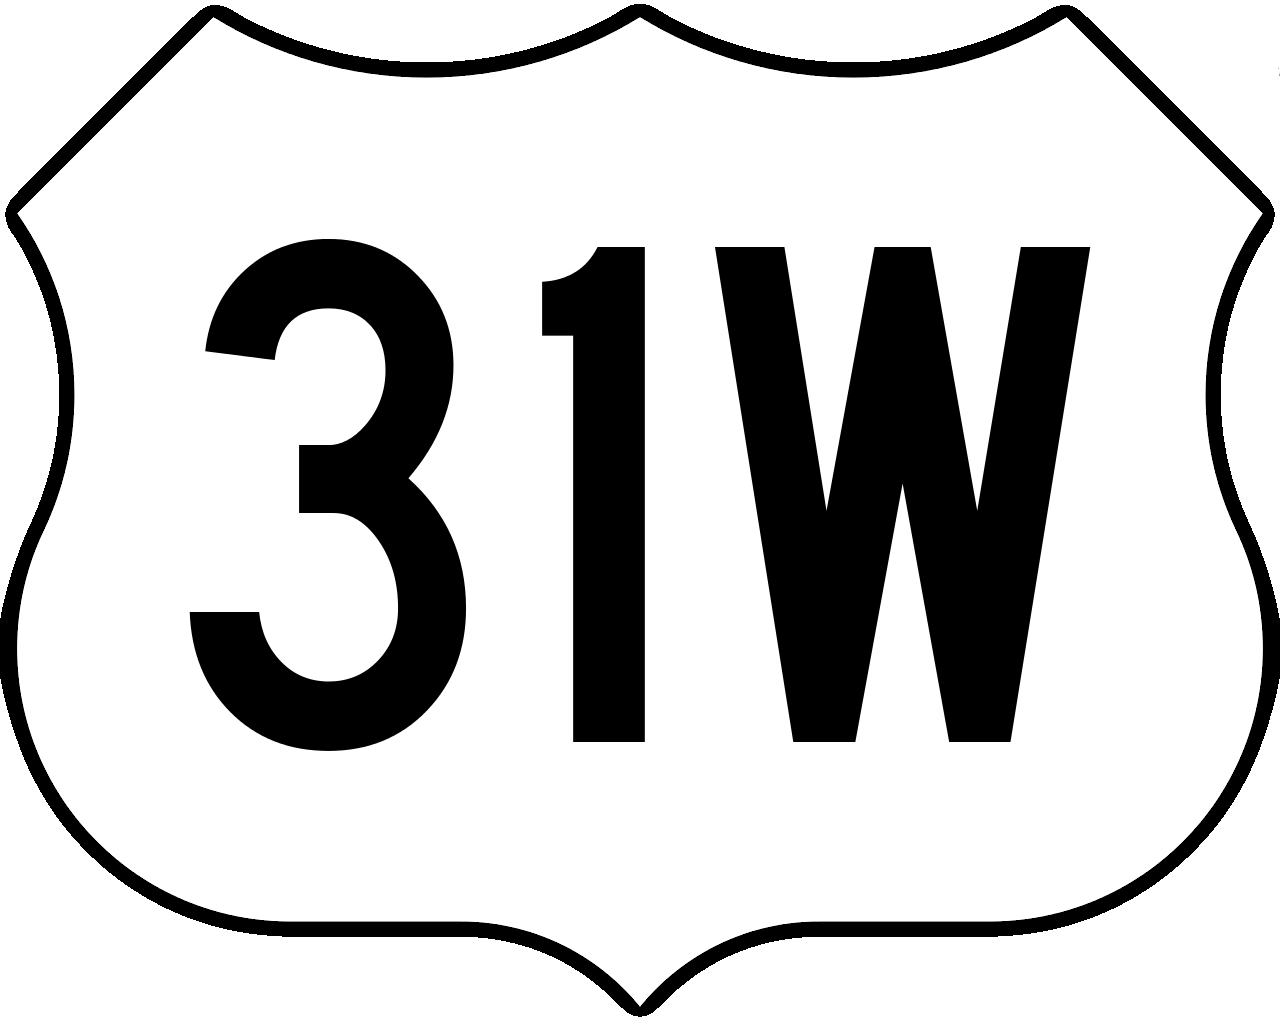 US 31W.png